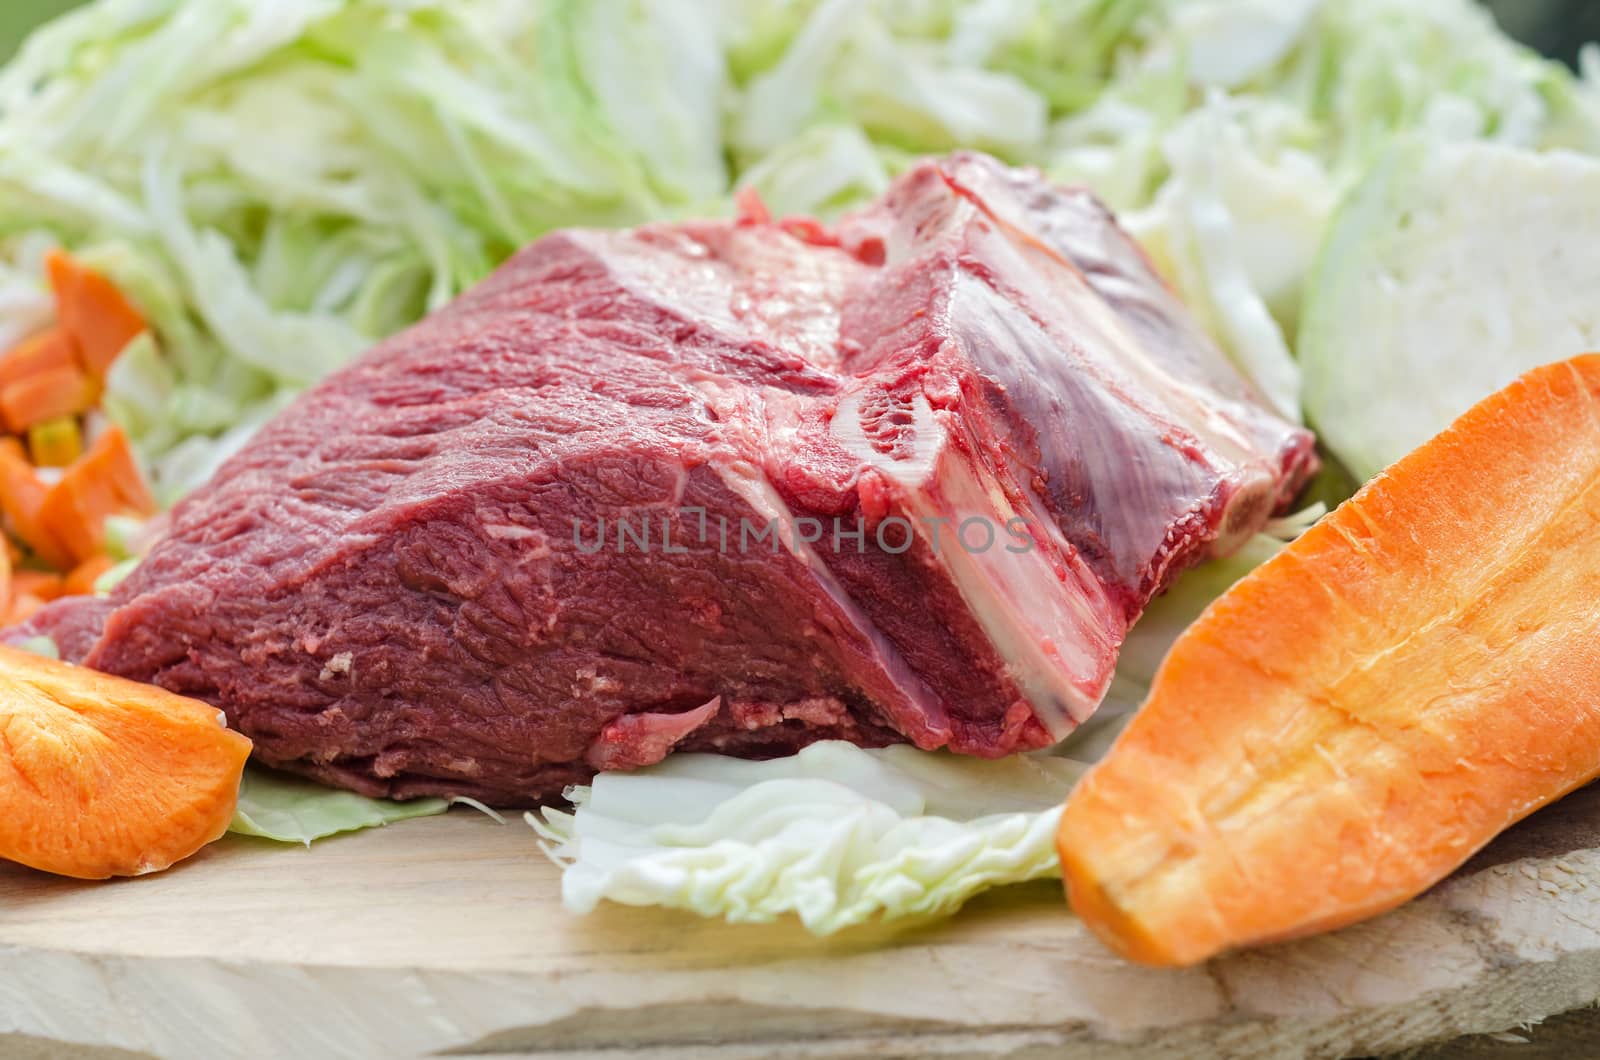 A big piece of raw beef and vegetables on a rough Board, ingredients for cooking at the picnic